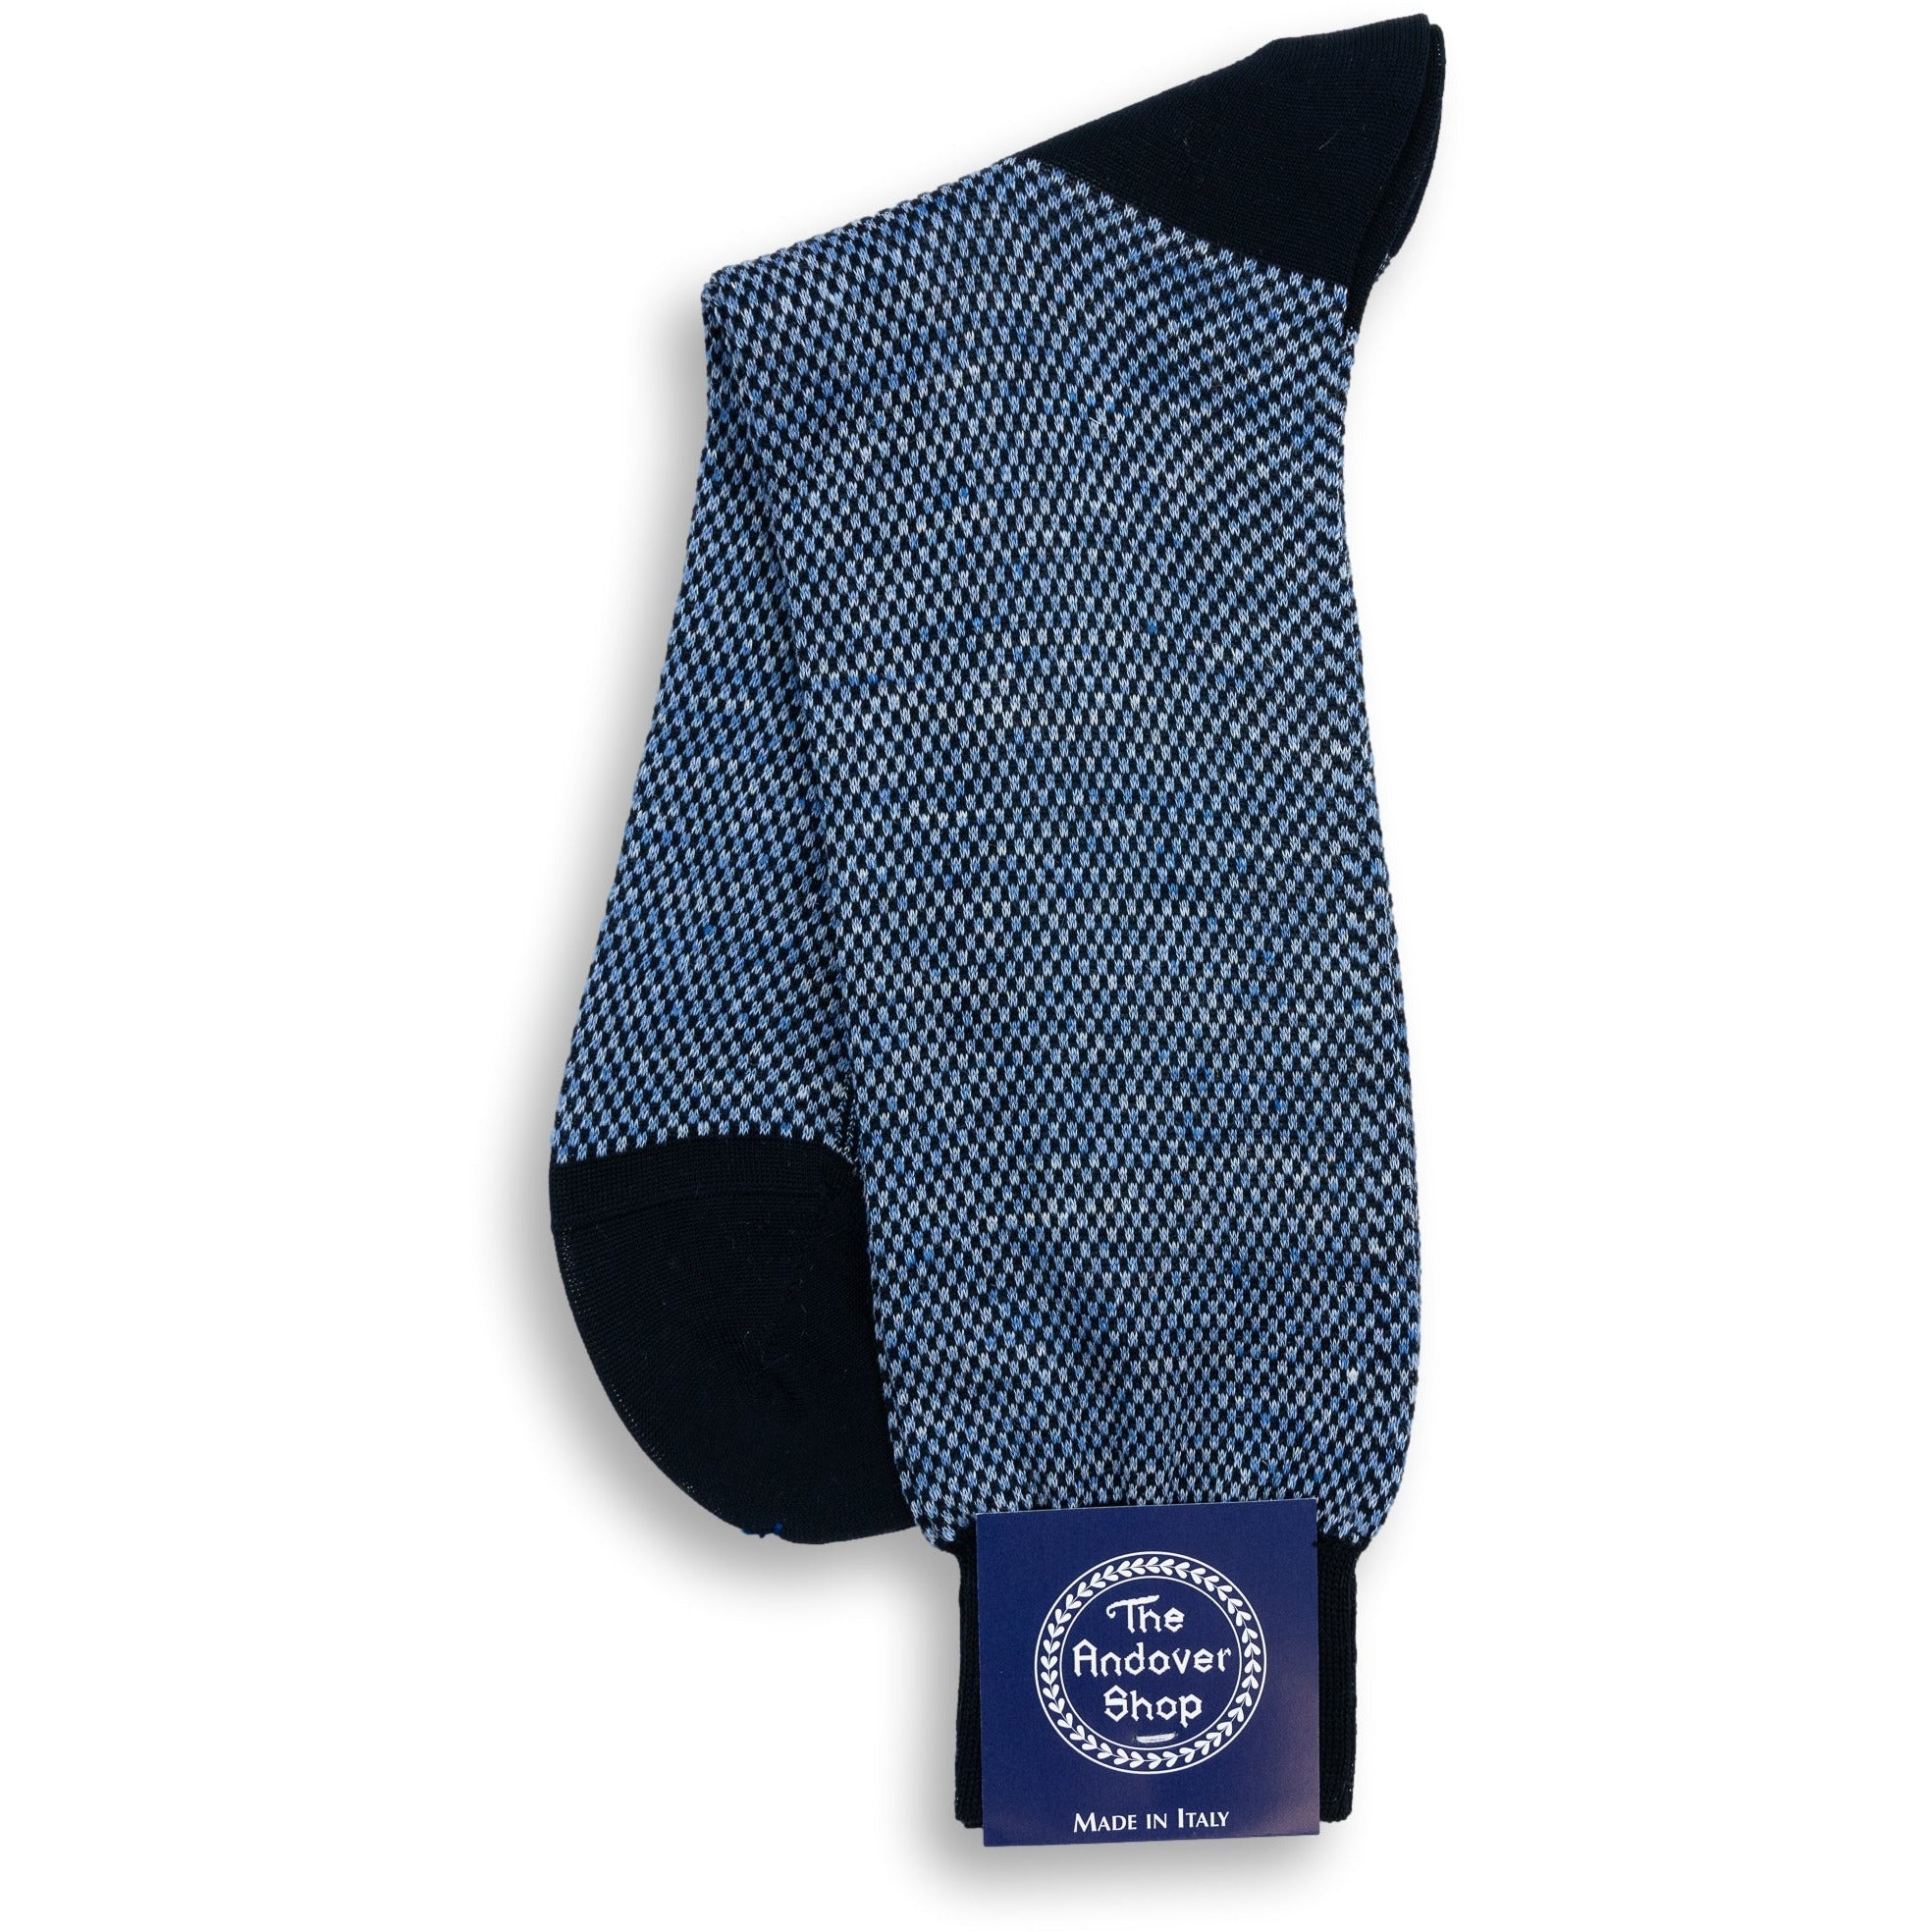 Mid-Calf Cotton and Linen Square and Birdseye Patterned Dress Sock